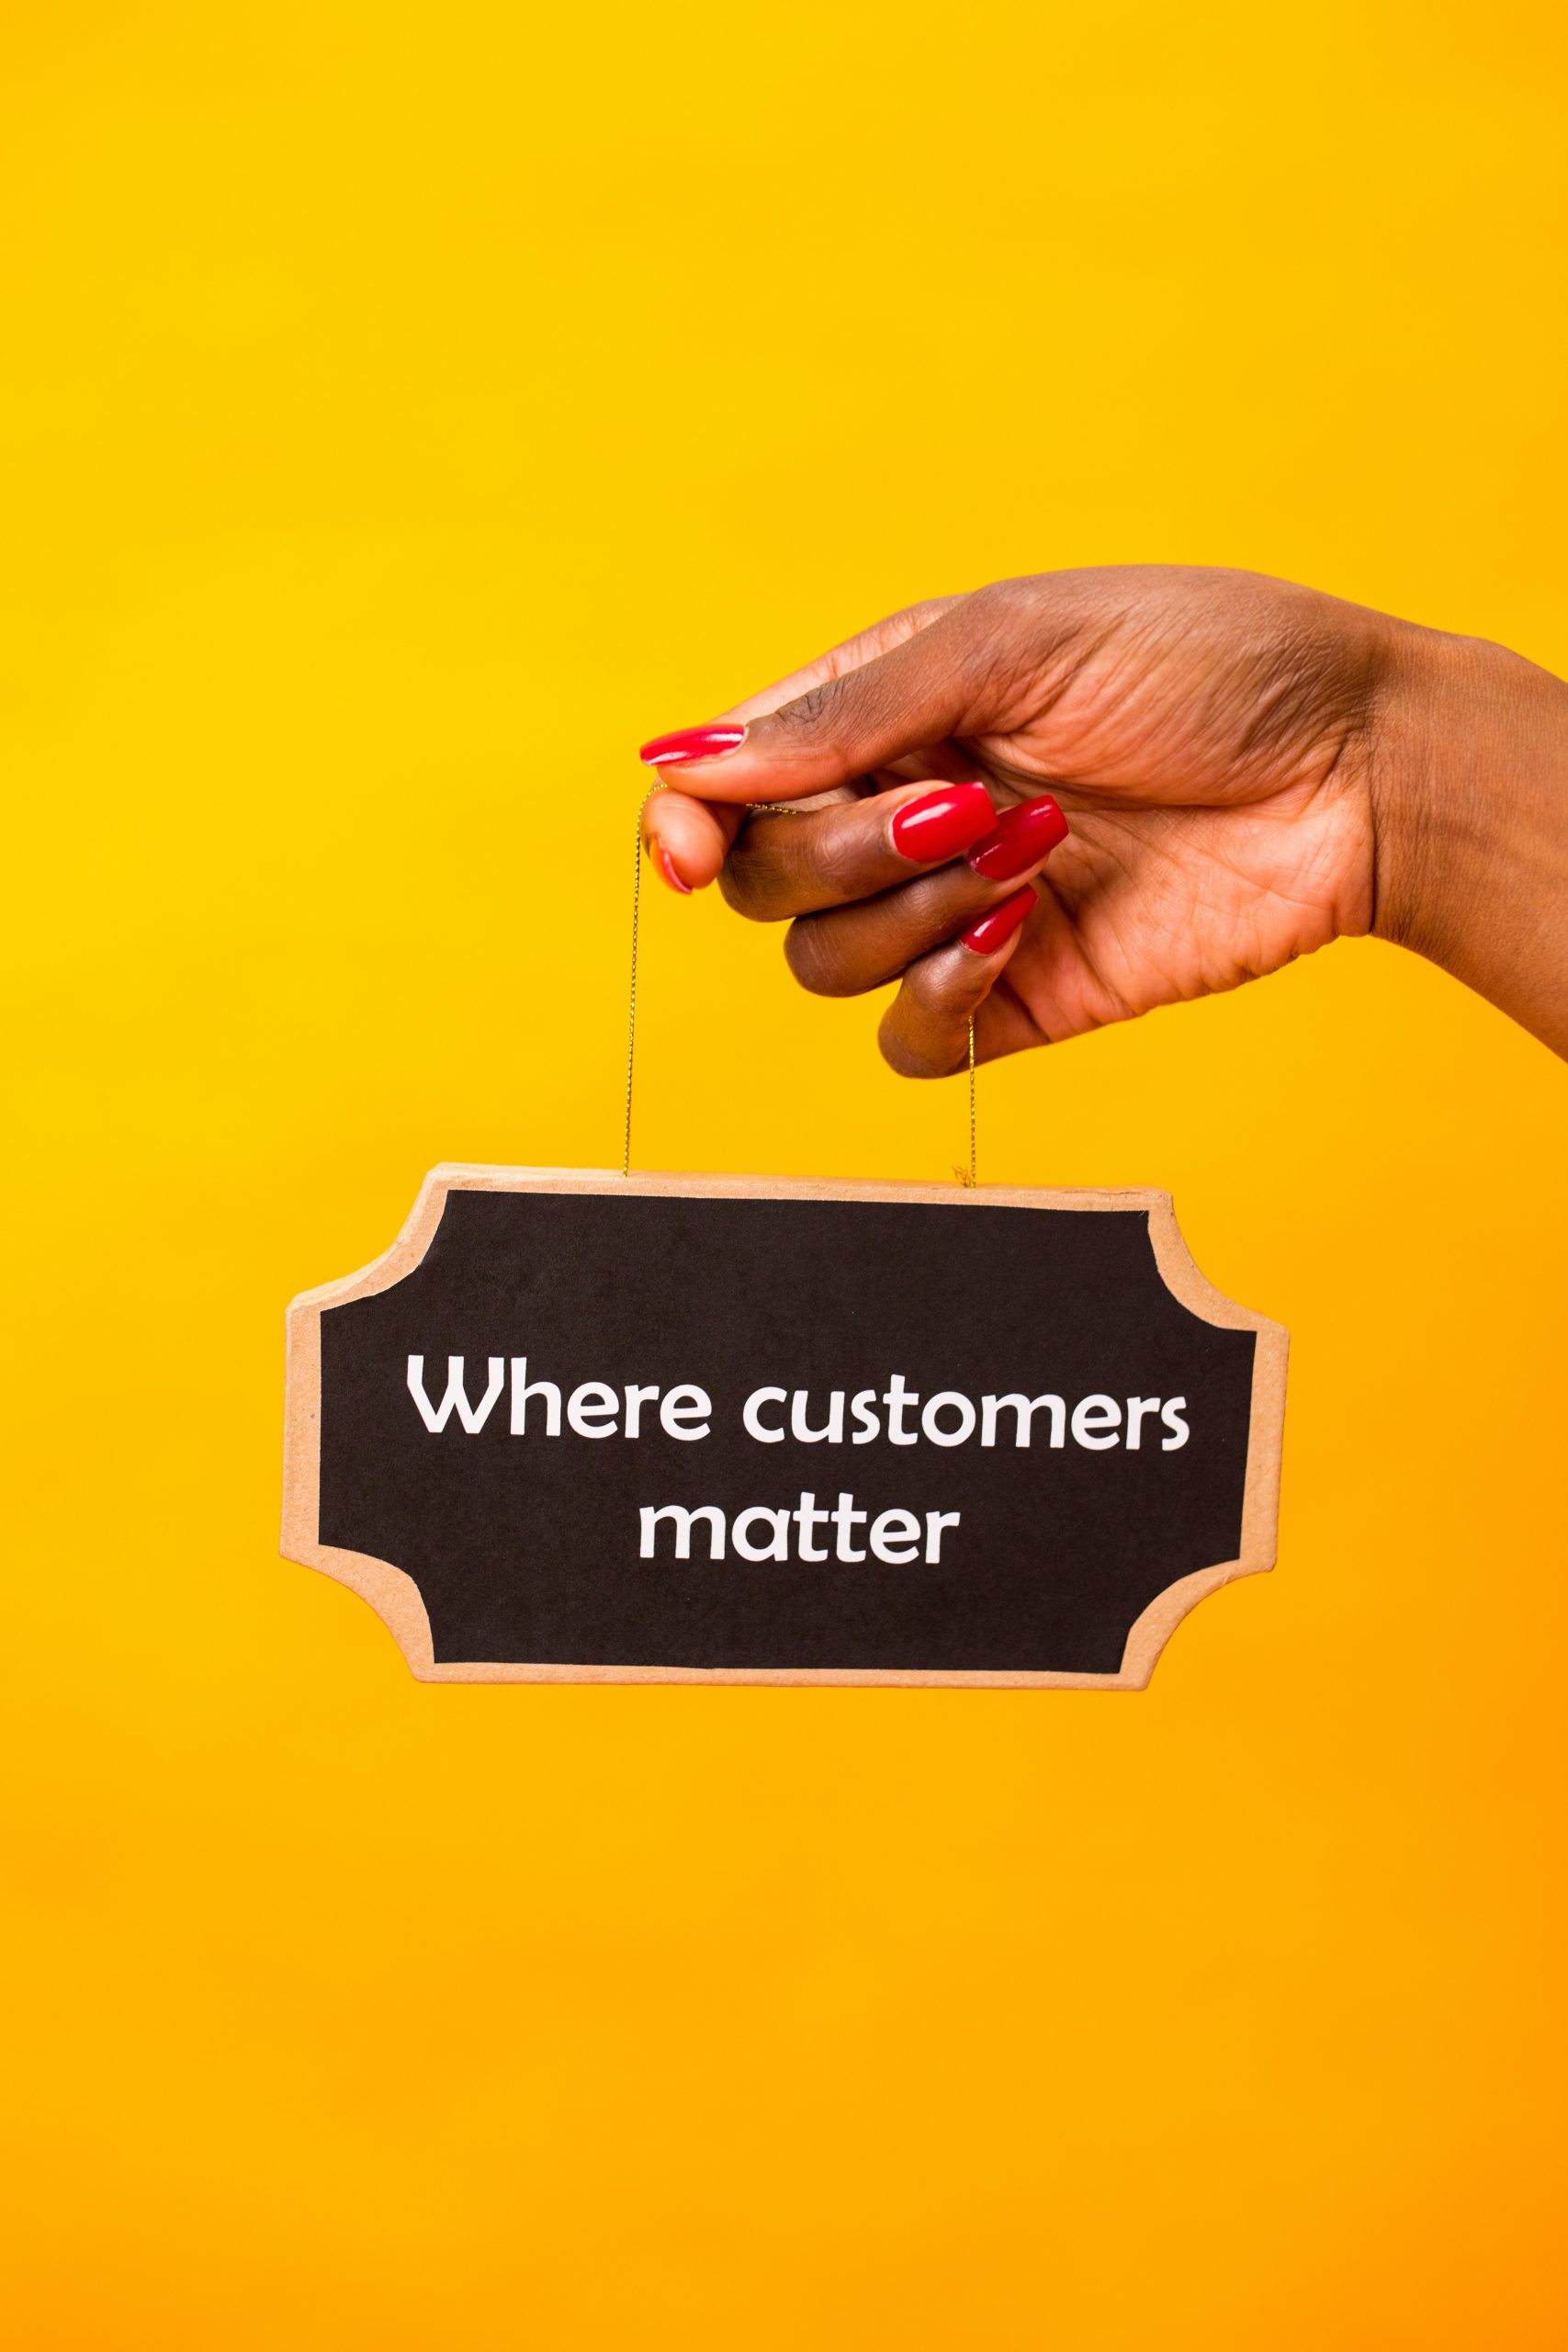 Photo by RODNAE Productions from Pexels, Where customers matter